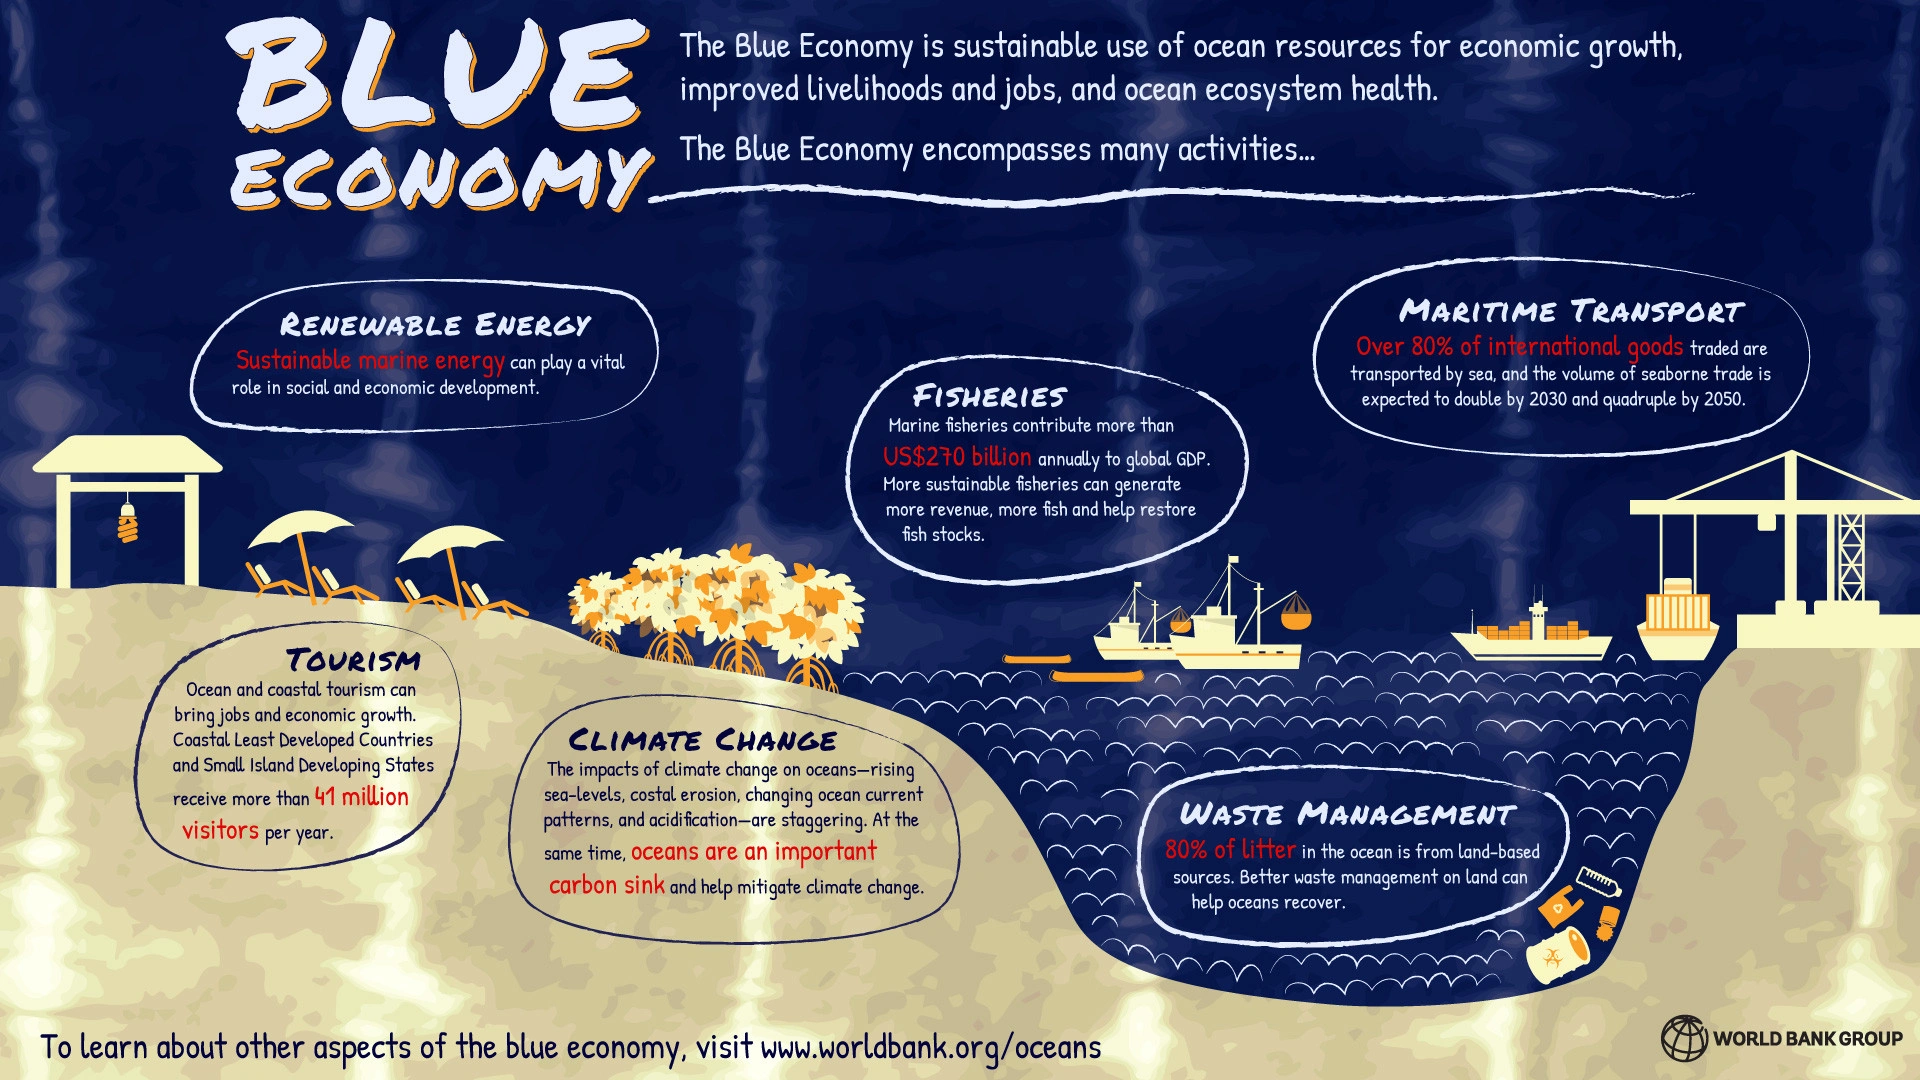 The Blue Economy is sustainable use of ocean resources for economic growth, improved livelihood and jobs, and ocean ecosystem health. The Blue Economy encompasses many activities, including renewable energy, fisheries, maritime transport, waste management, tourism, and climate change.